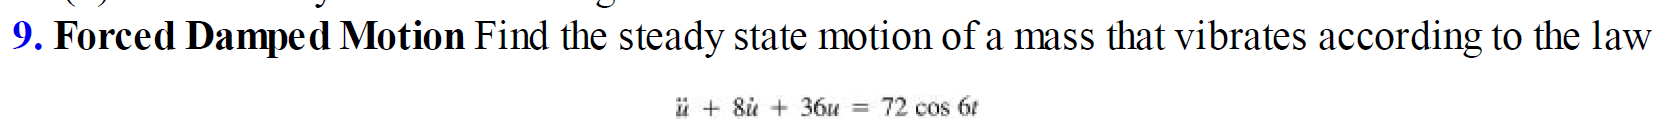 9. Forced Damped Motion Find the steady state motion of a mass that vibrates according to the law
ü + 8i + 36u =
72 cos 6t
